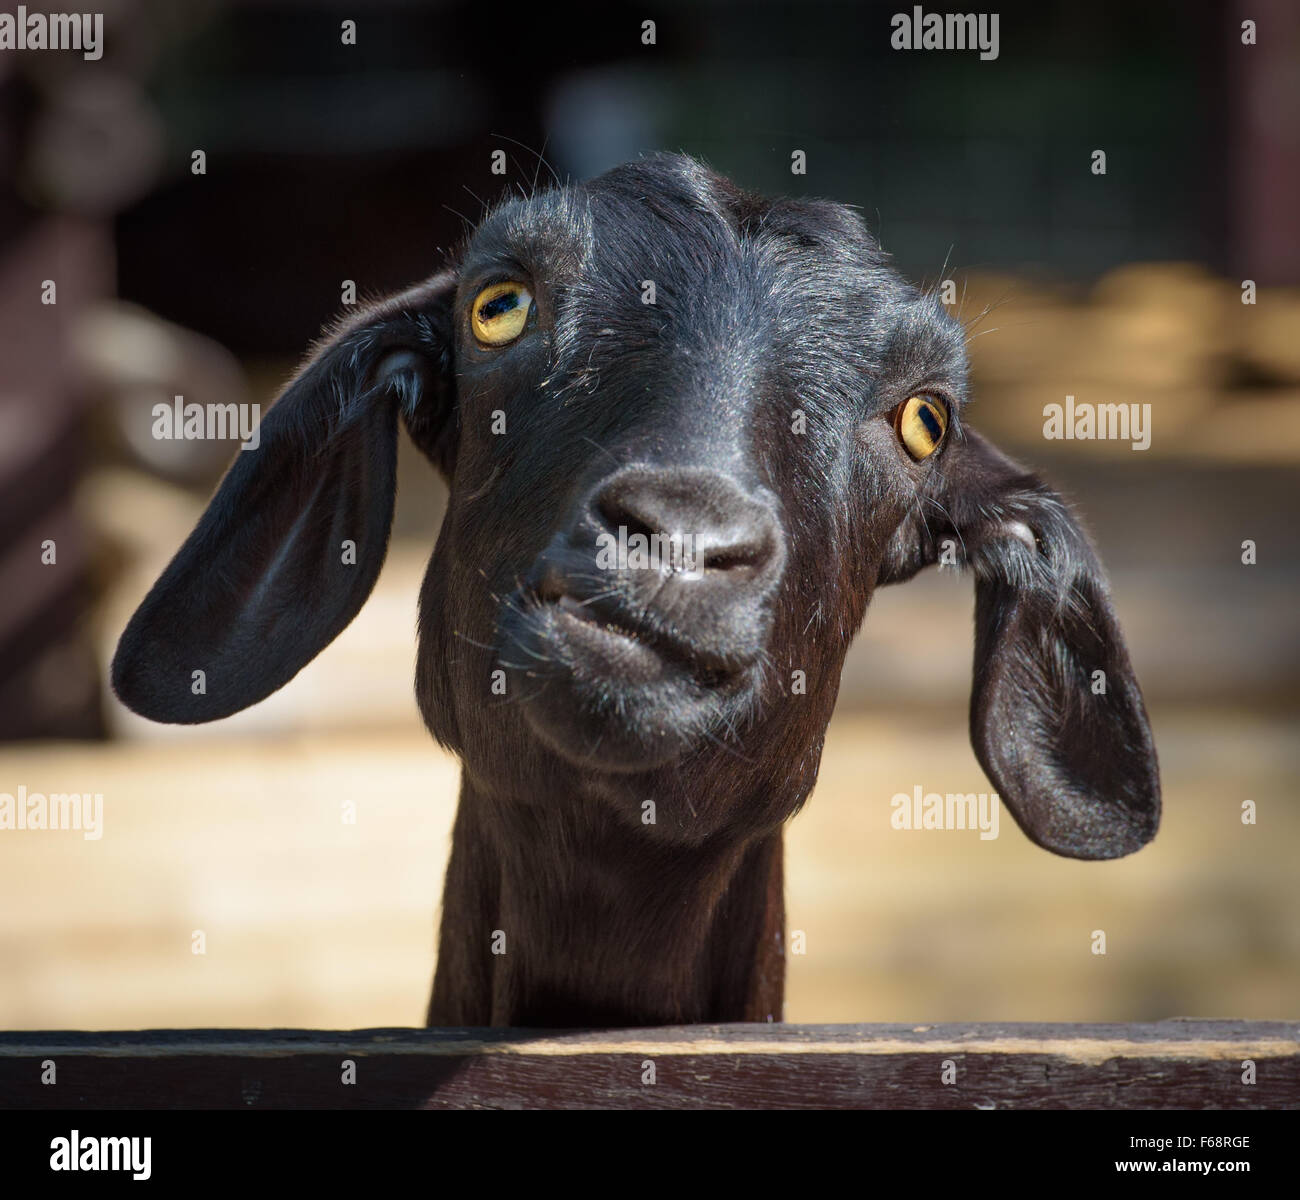 Silly looking black goat, closeup portrait Stock Photo